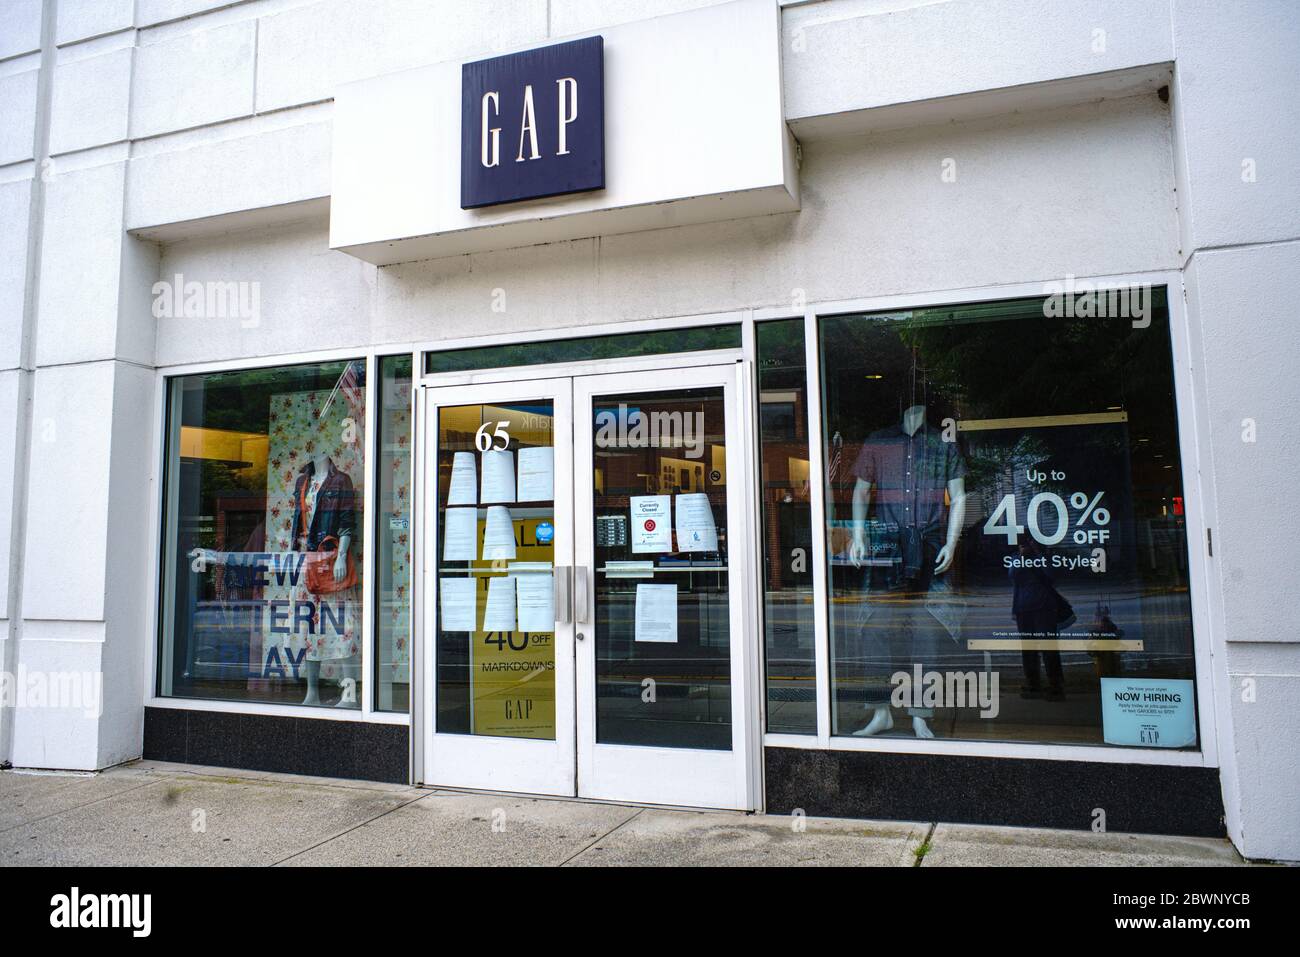 Mount Kisco, New York May 29, 2020: As Westchester County NY begins Phase 1 of its limited reopening after the coronavirus pandemic, retail stores such as the Gap provide curbside pickup. Stock Photo